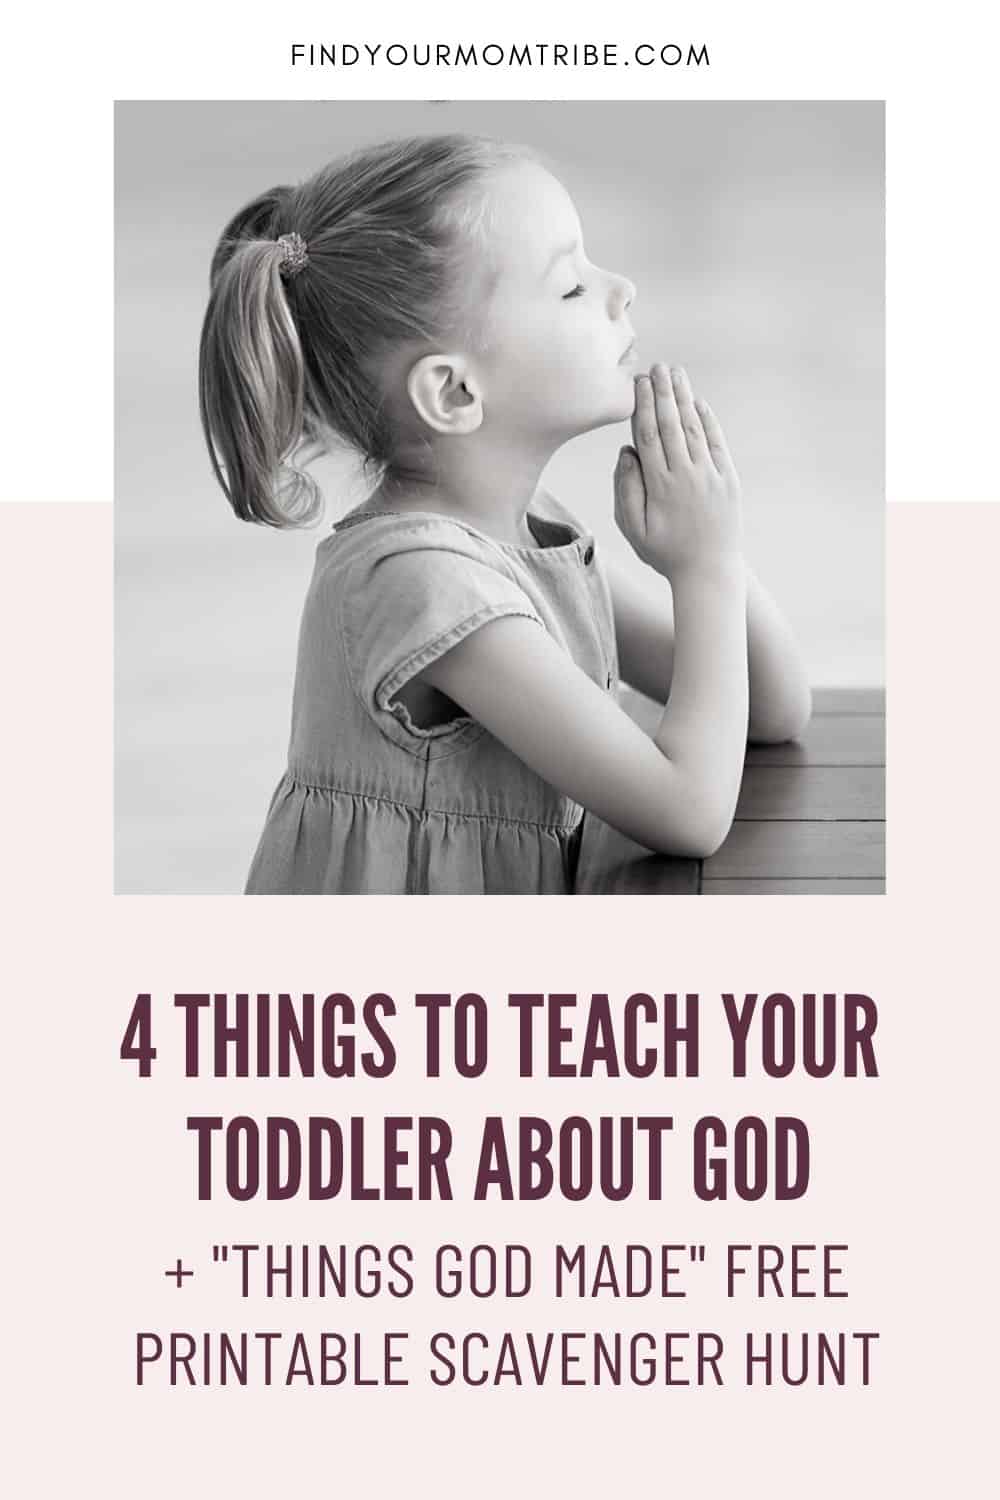 4 Things to Teach your Toddler about God Pinterest